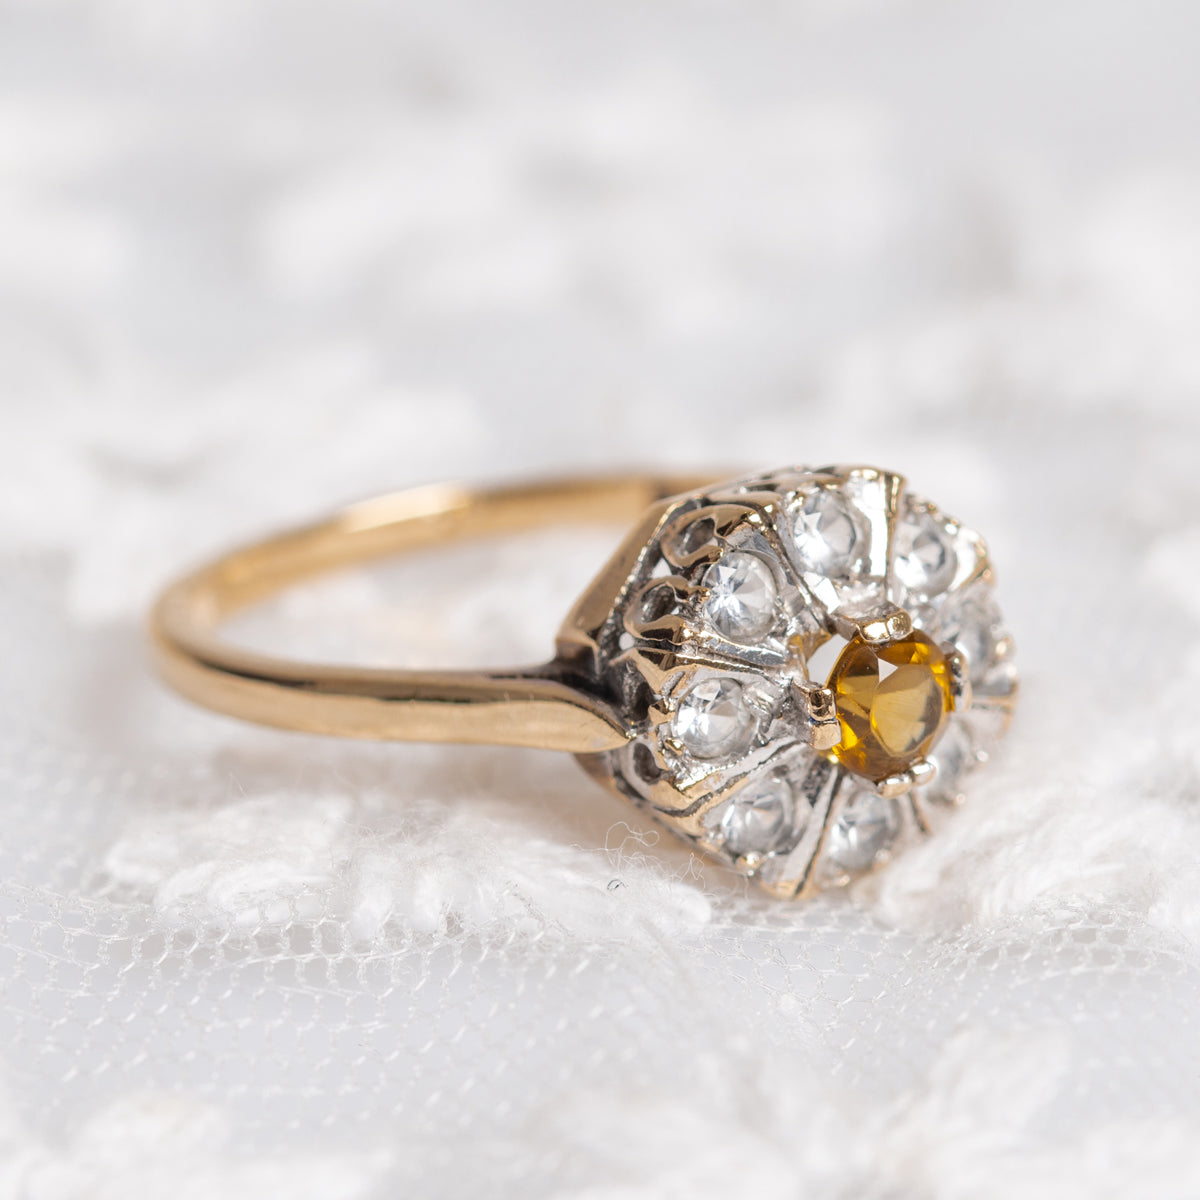 Vintage Golden Yellow Tourmaline Gemstone Daisy Ring In 9ct Gold UK Size P  (A1404)